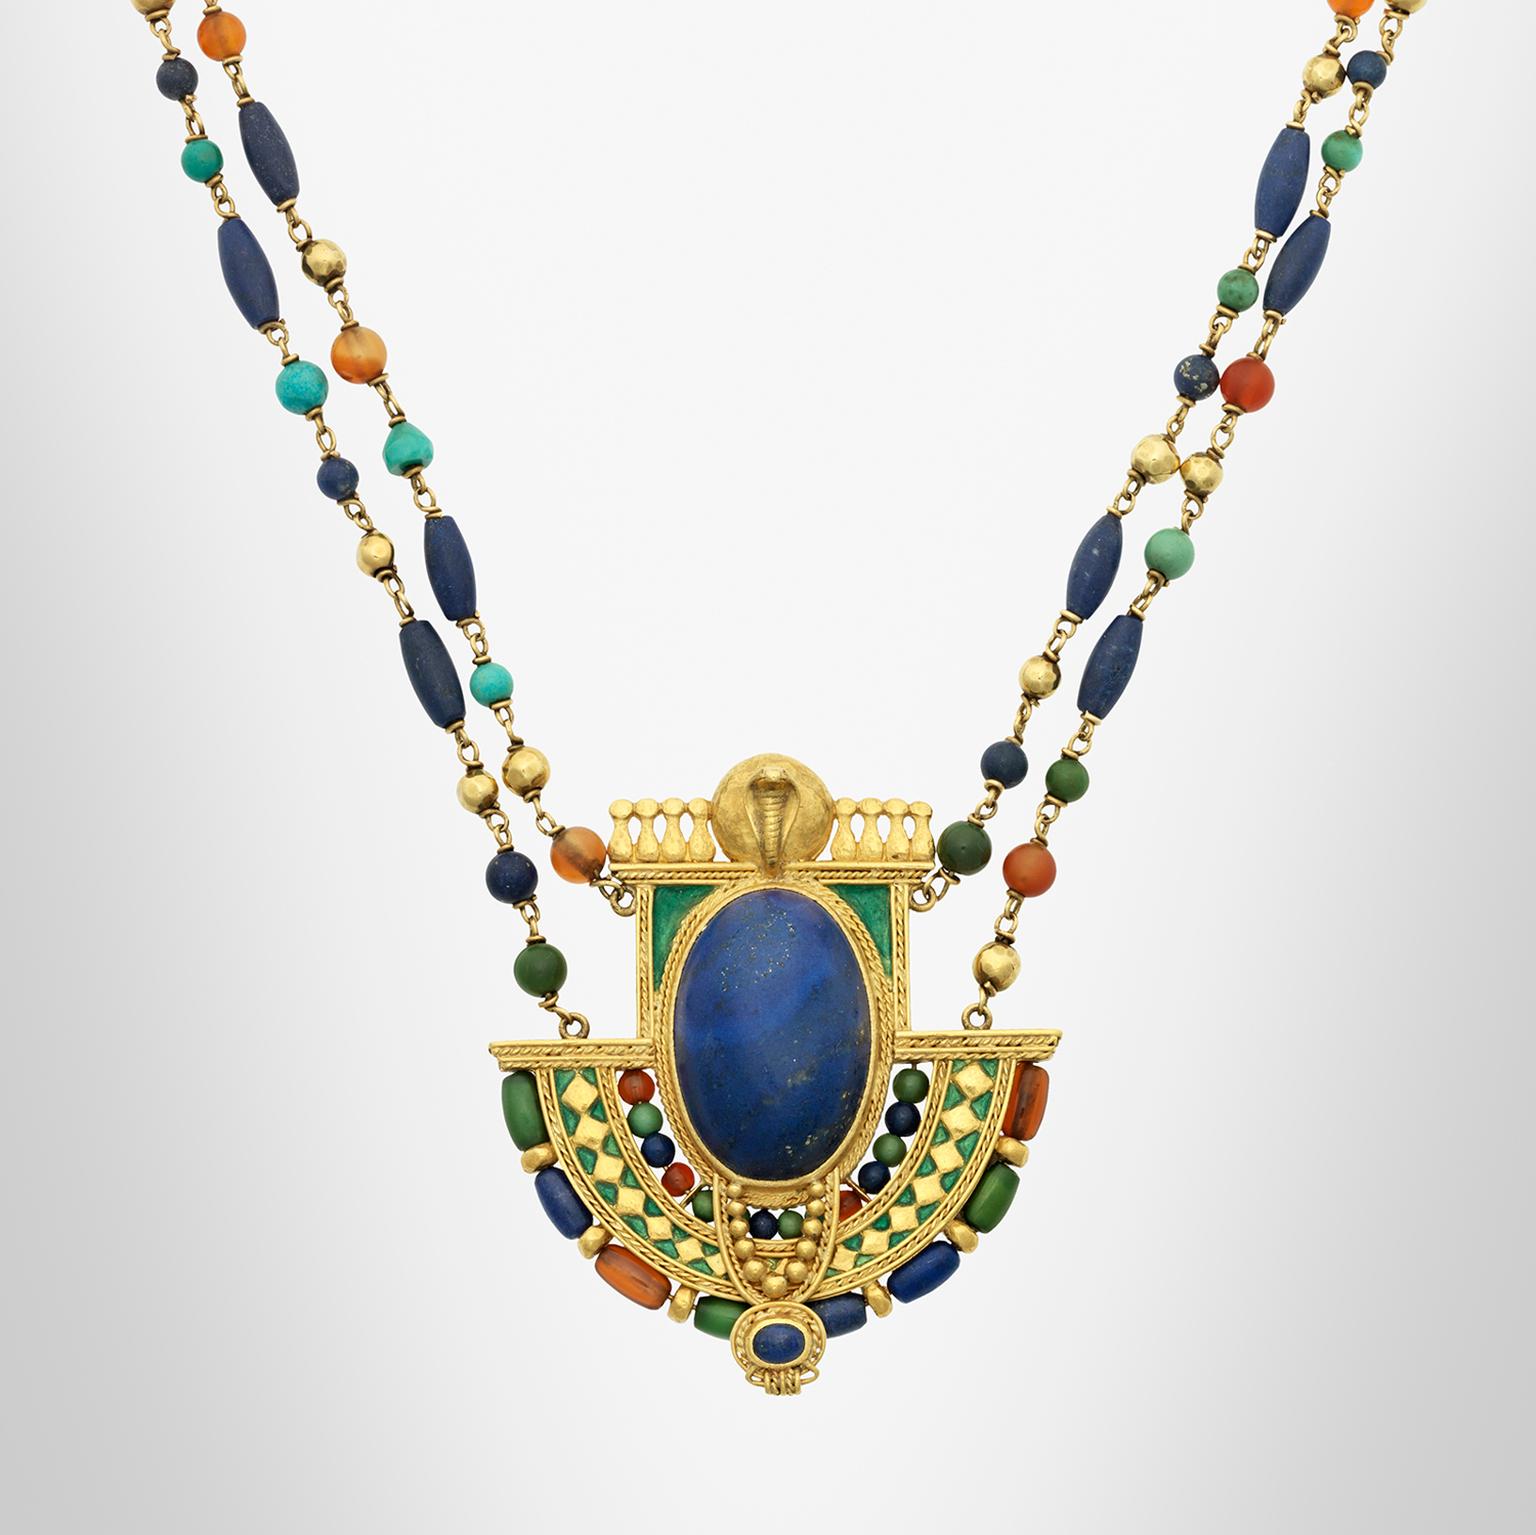 Egyptian revival necklace from 1913, designed by Louis Comfort Tiffany